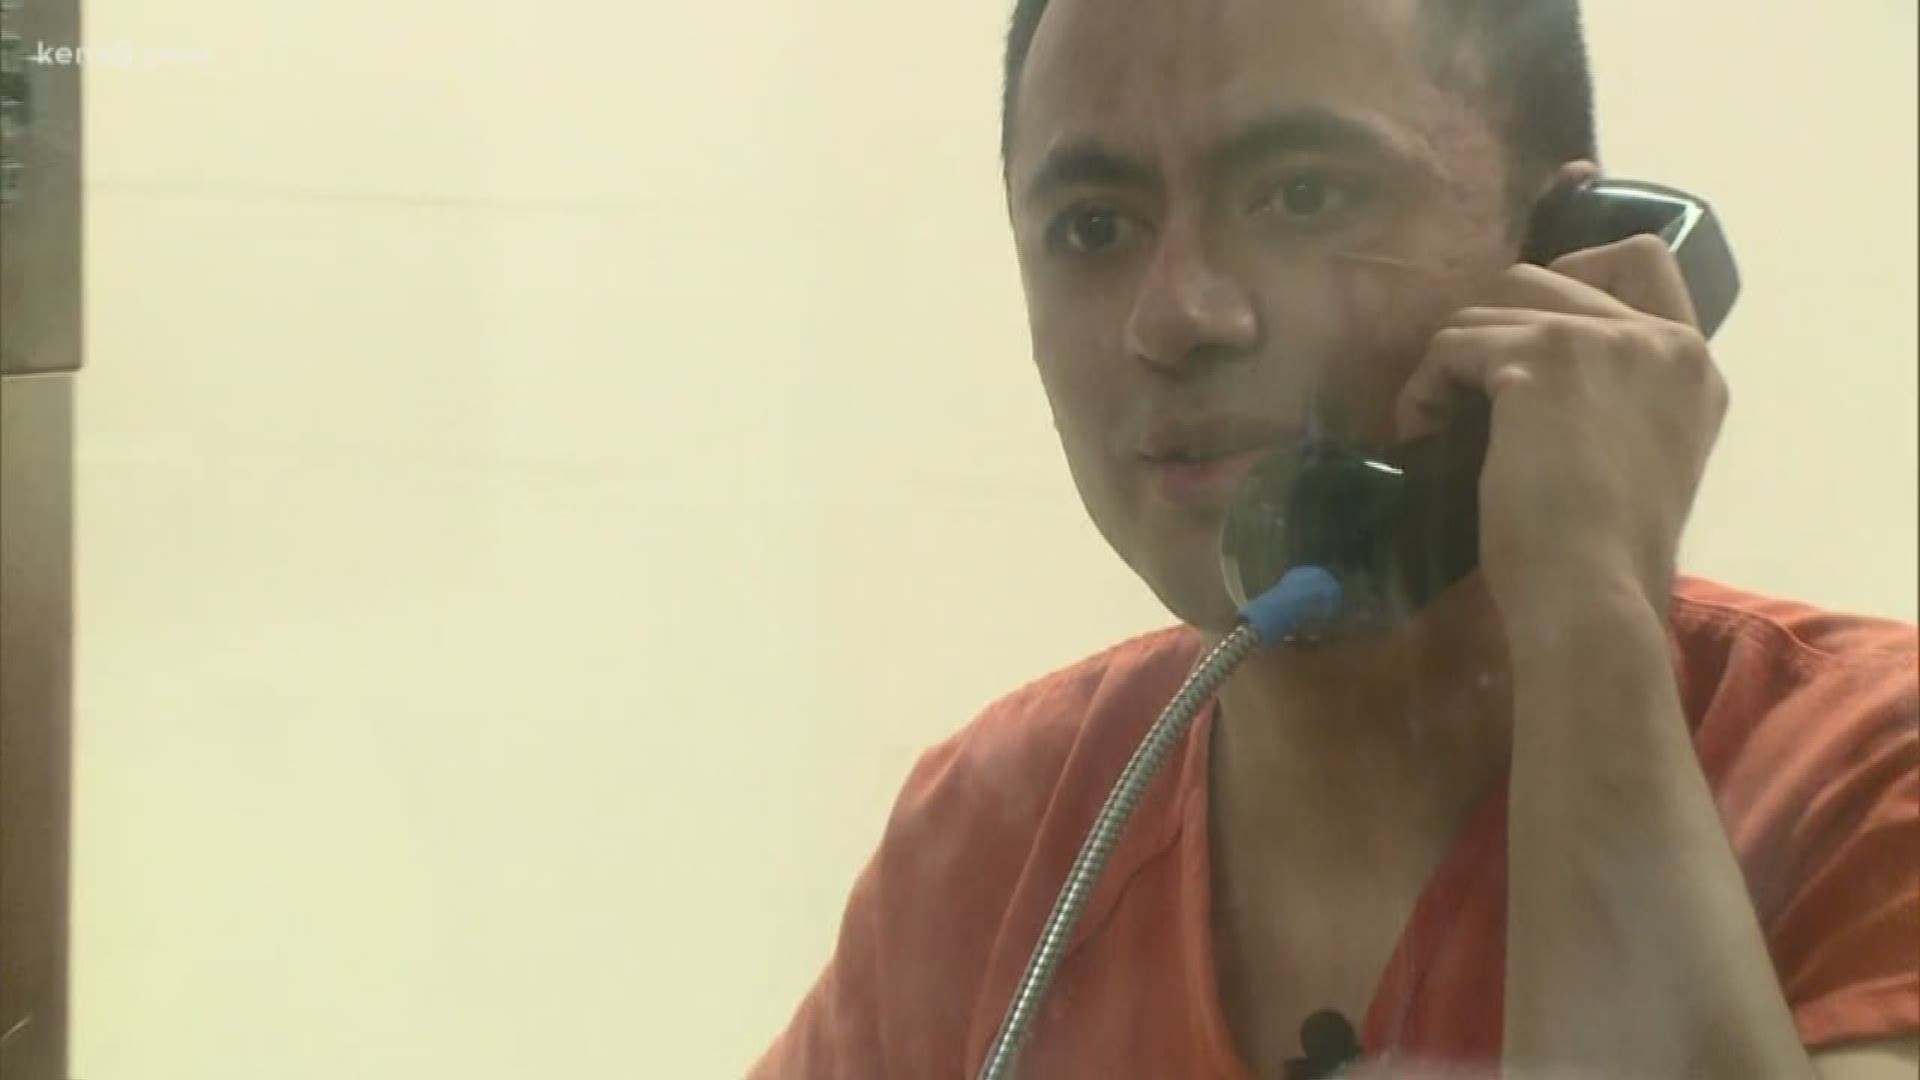 A judge handed down the sentence: life without parole for 31-year-old Johnny Avalos. He was convicted of murdering four women. Eyewitness News reporter Henry Ramos is live.